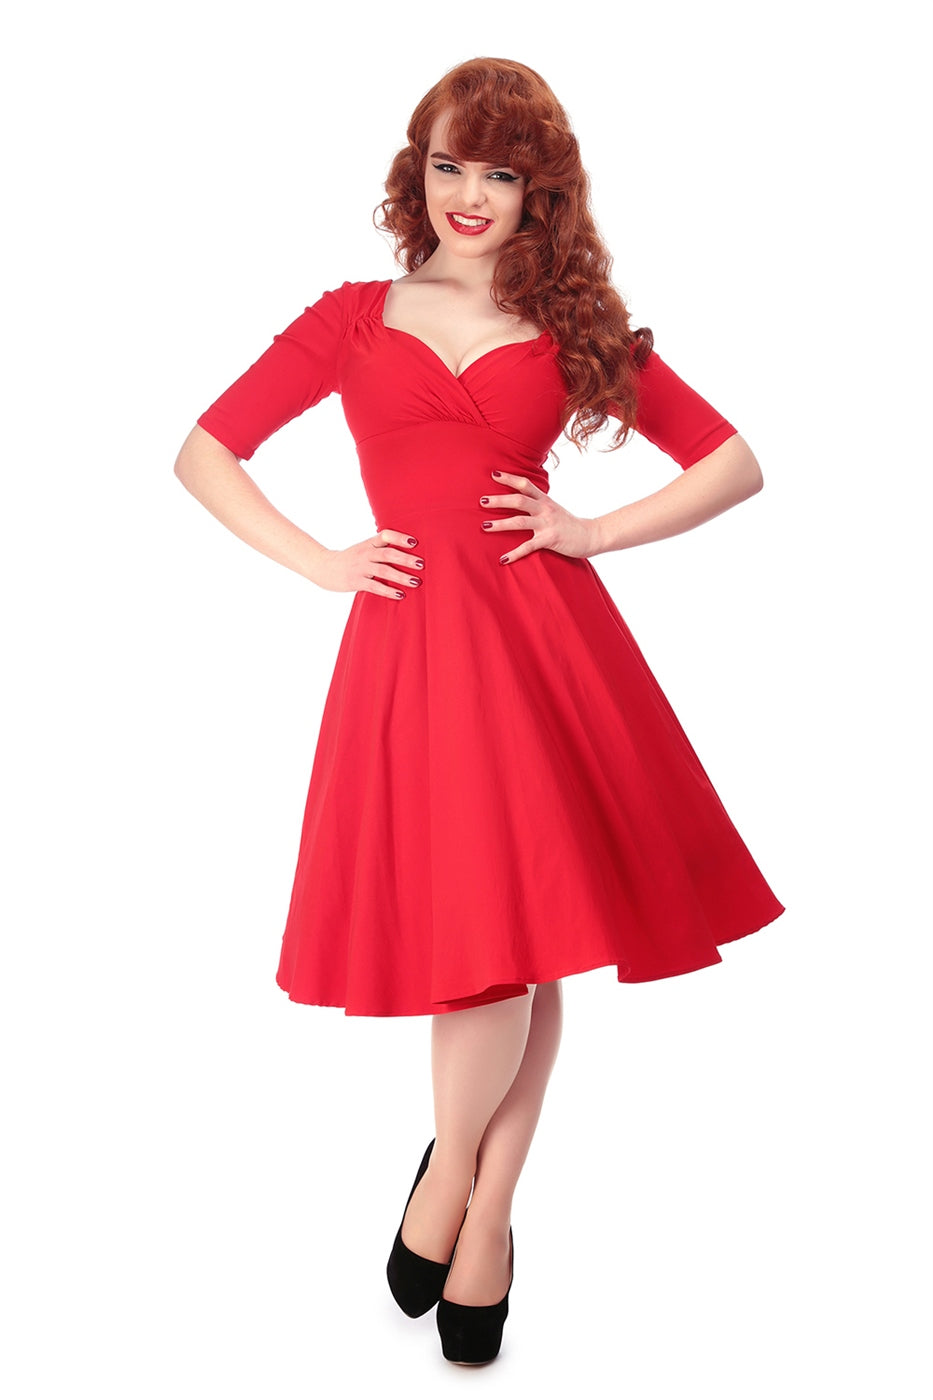 Smiling vintage style model wearing red lipstick, black eyeliner and a red sweetheart neckline swing dress with 1/2 length sleeves